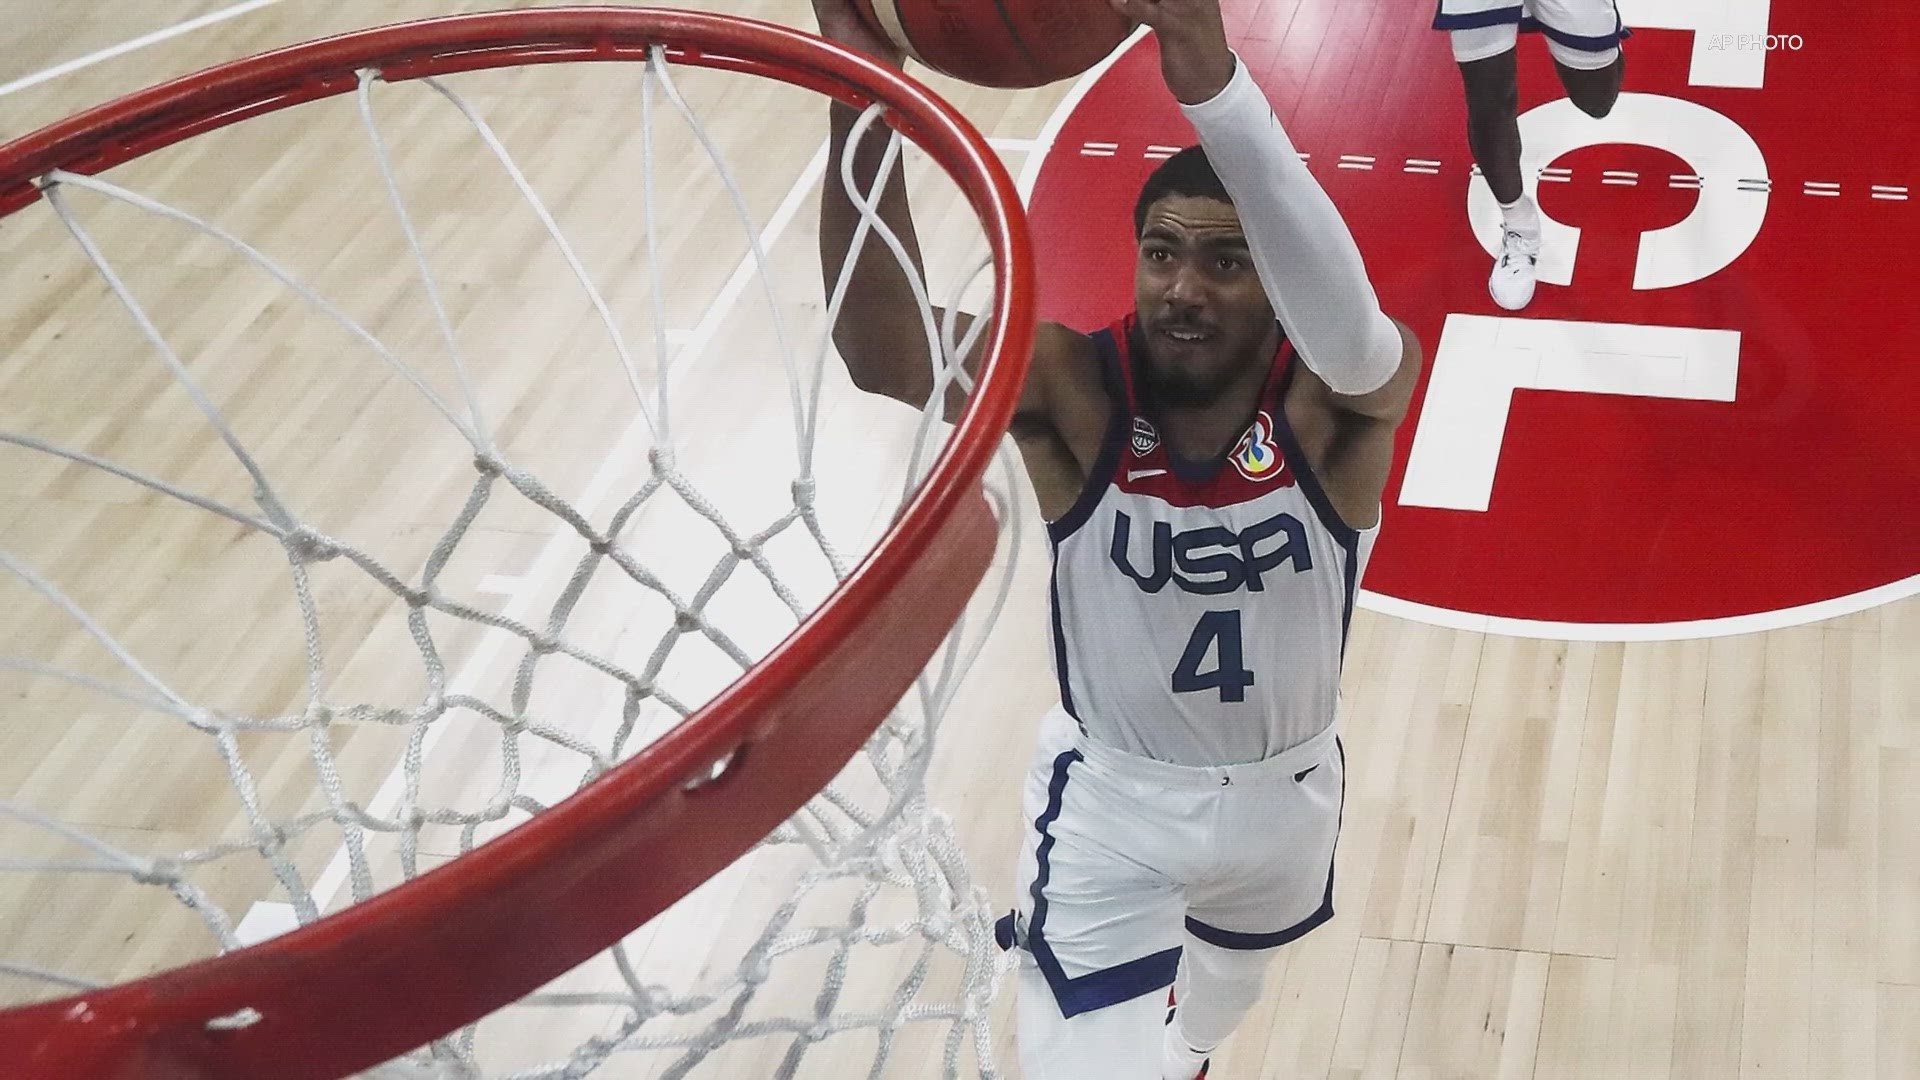 NBA insiders Adrian Wojnarowski and Shams Charania both reported the Indiana Pacers all-star is among the players selected to represent Team USA in Paris.